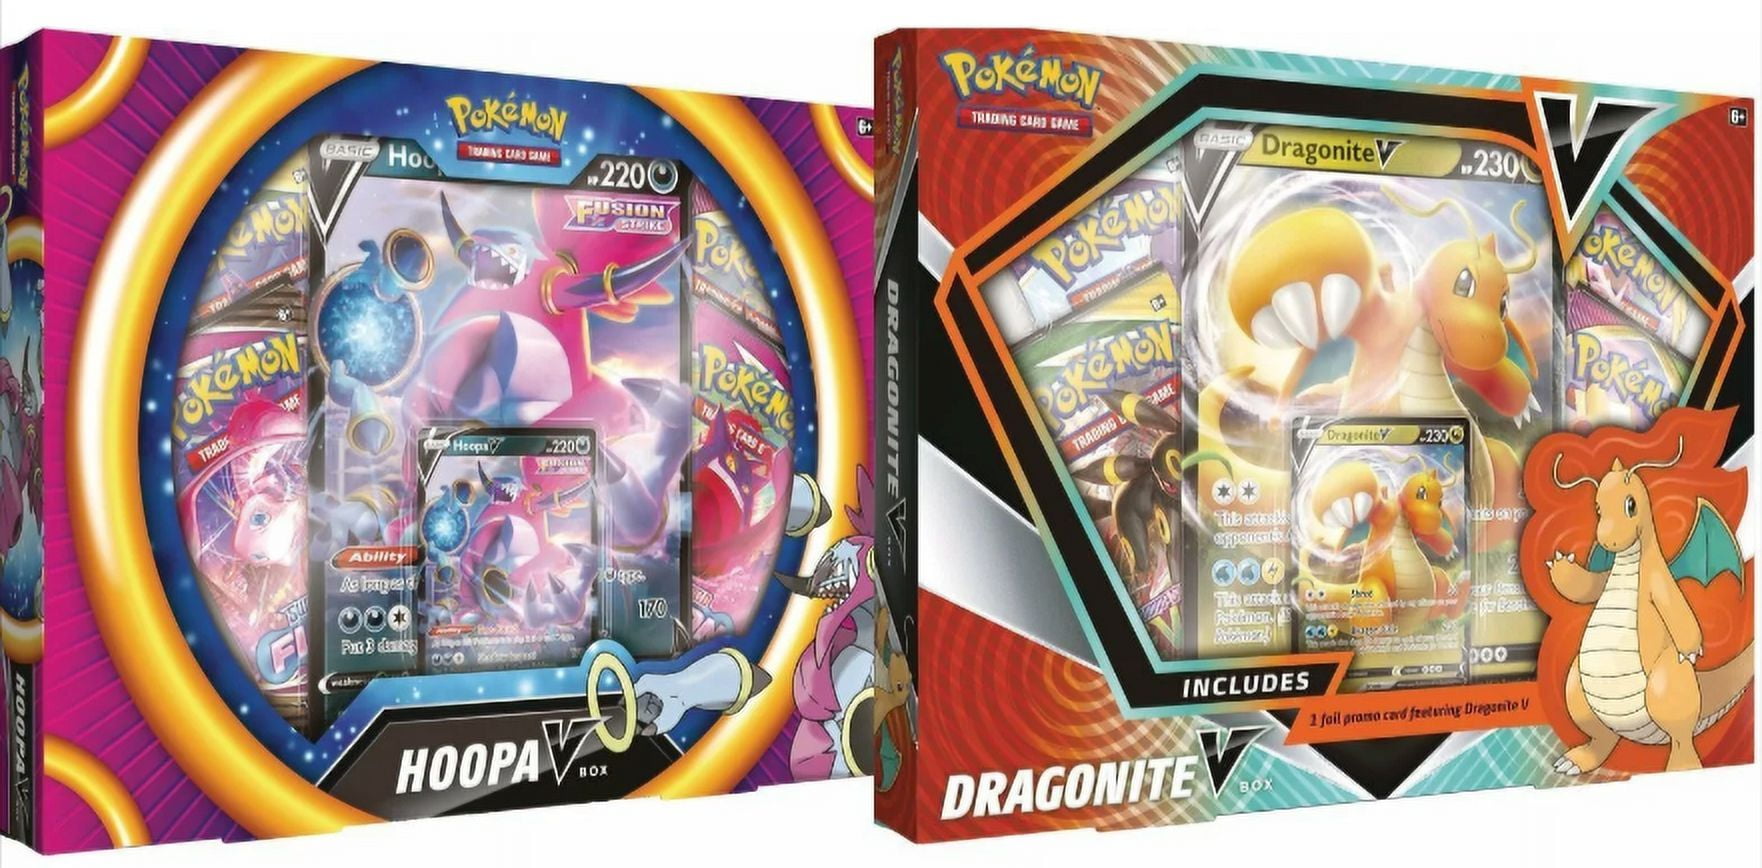 Trading Card Game Scarlet & Violet Pokemon 151 Booster Pack (English, 10 Cards)